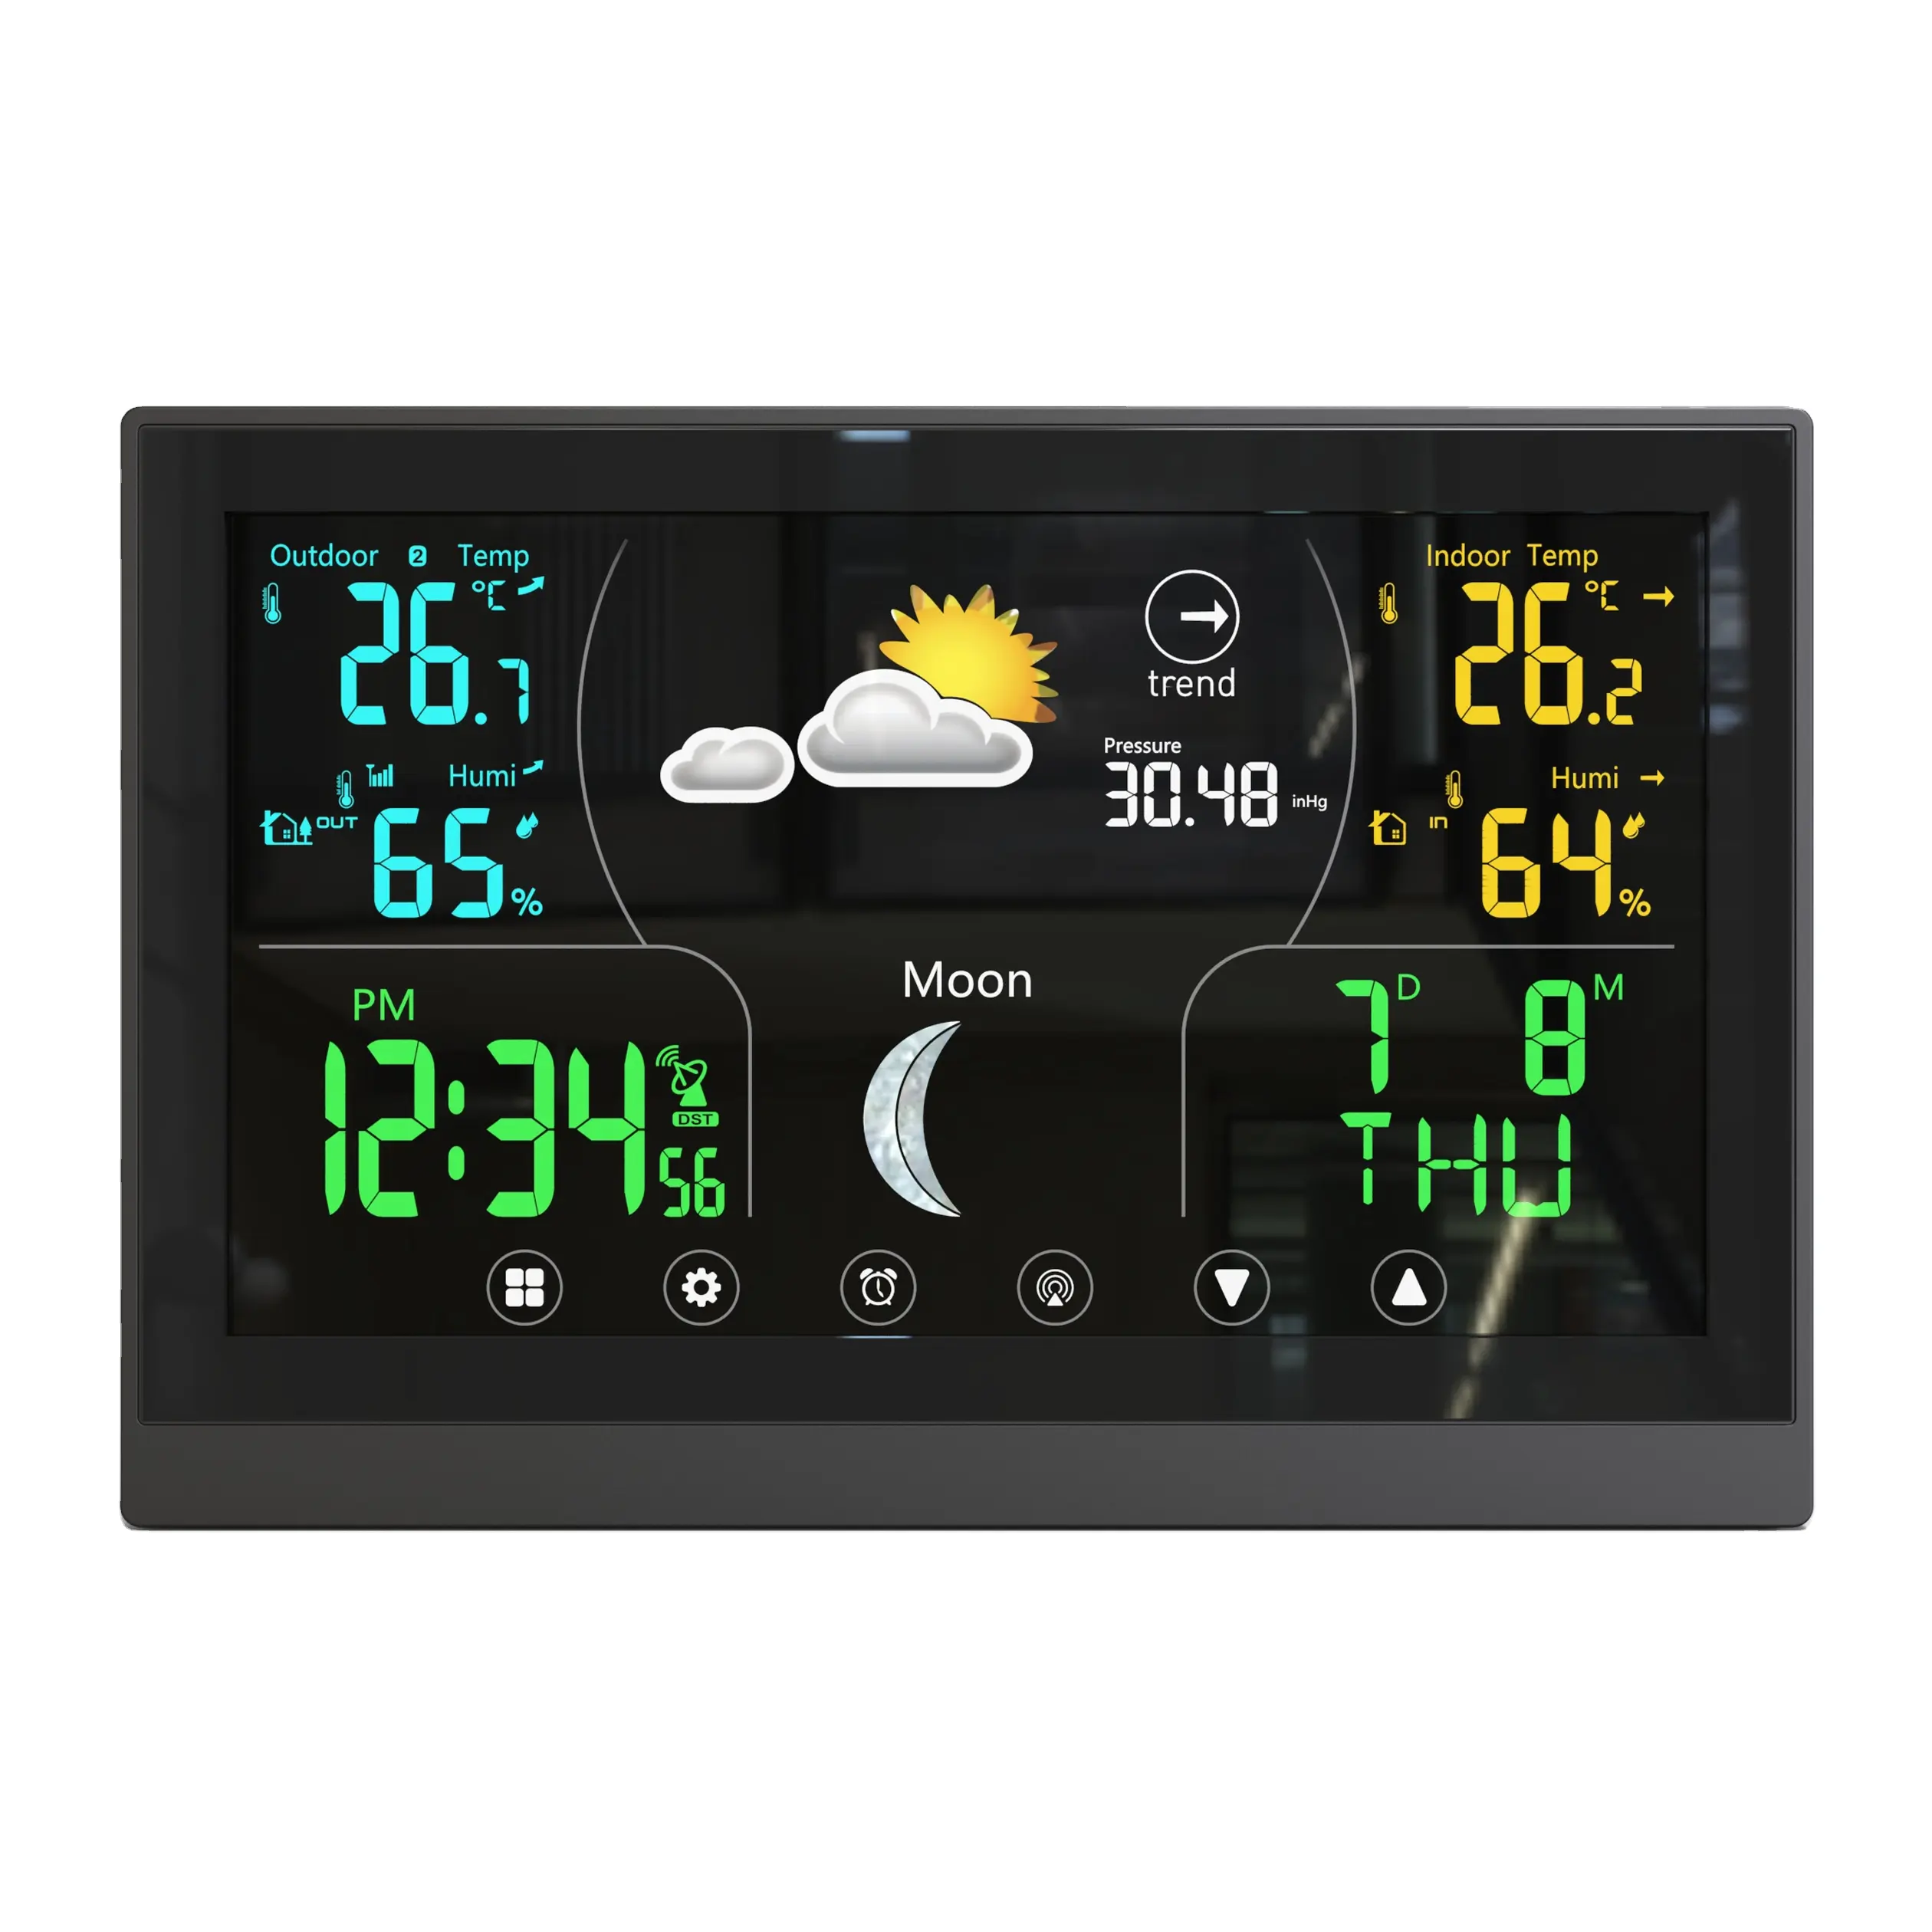 Digital Forecast Weather Station Forecast Weather Touch Screen LCD Color Display Indoor Temperature